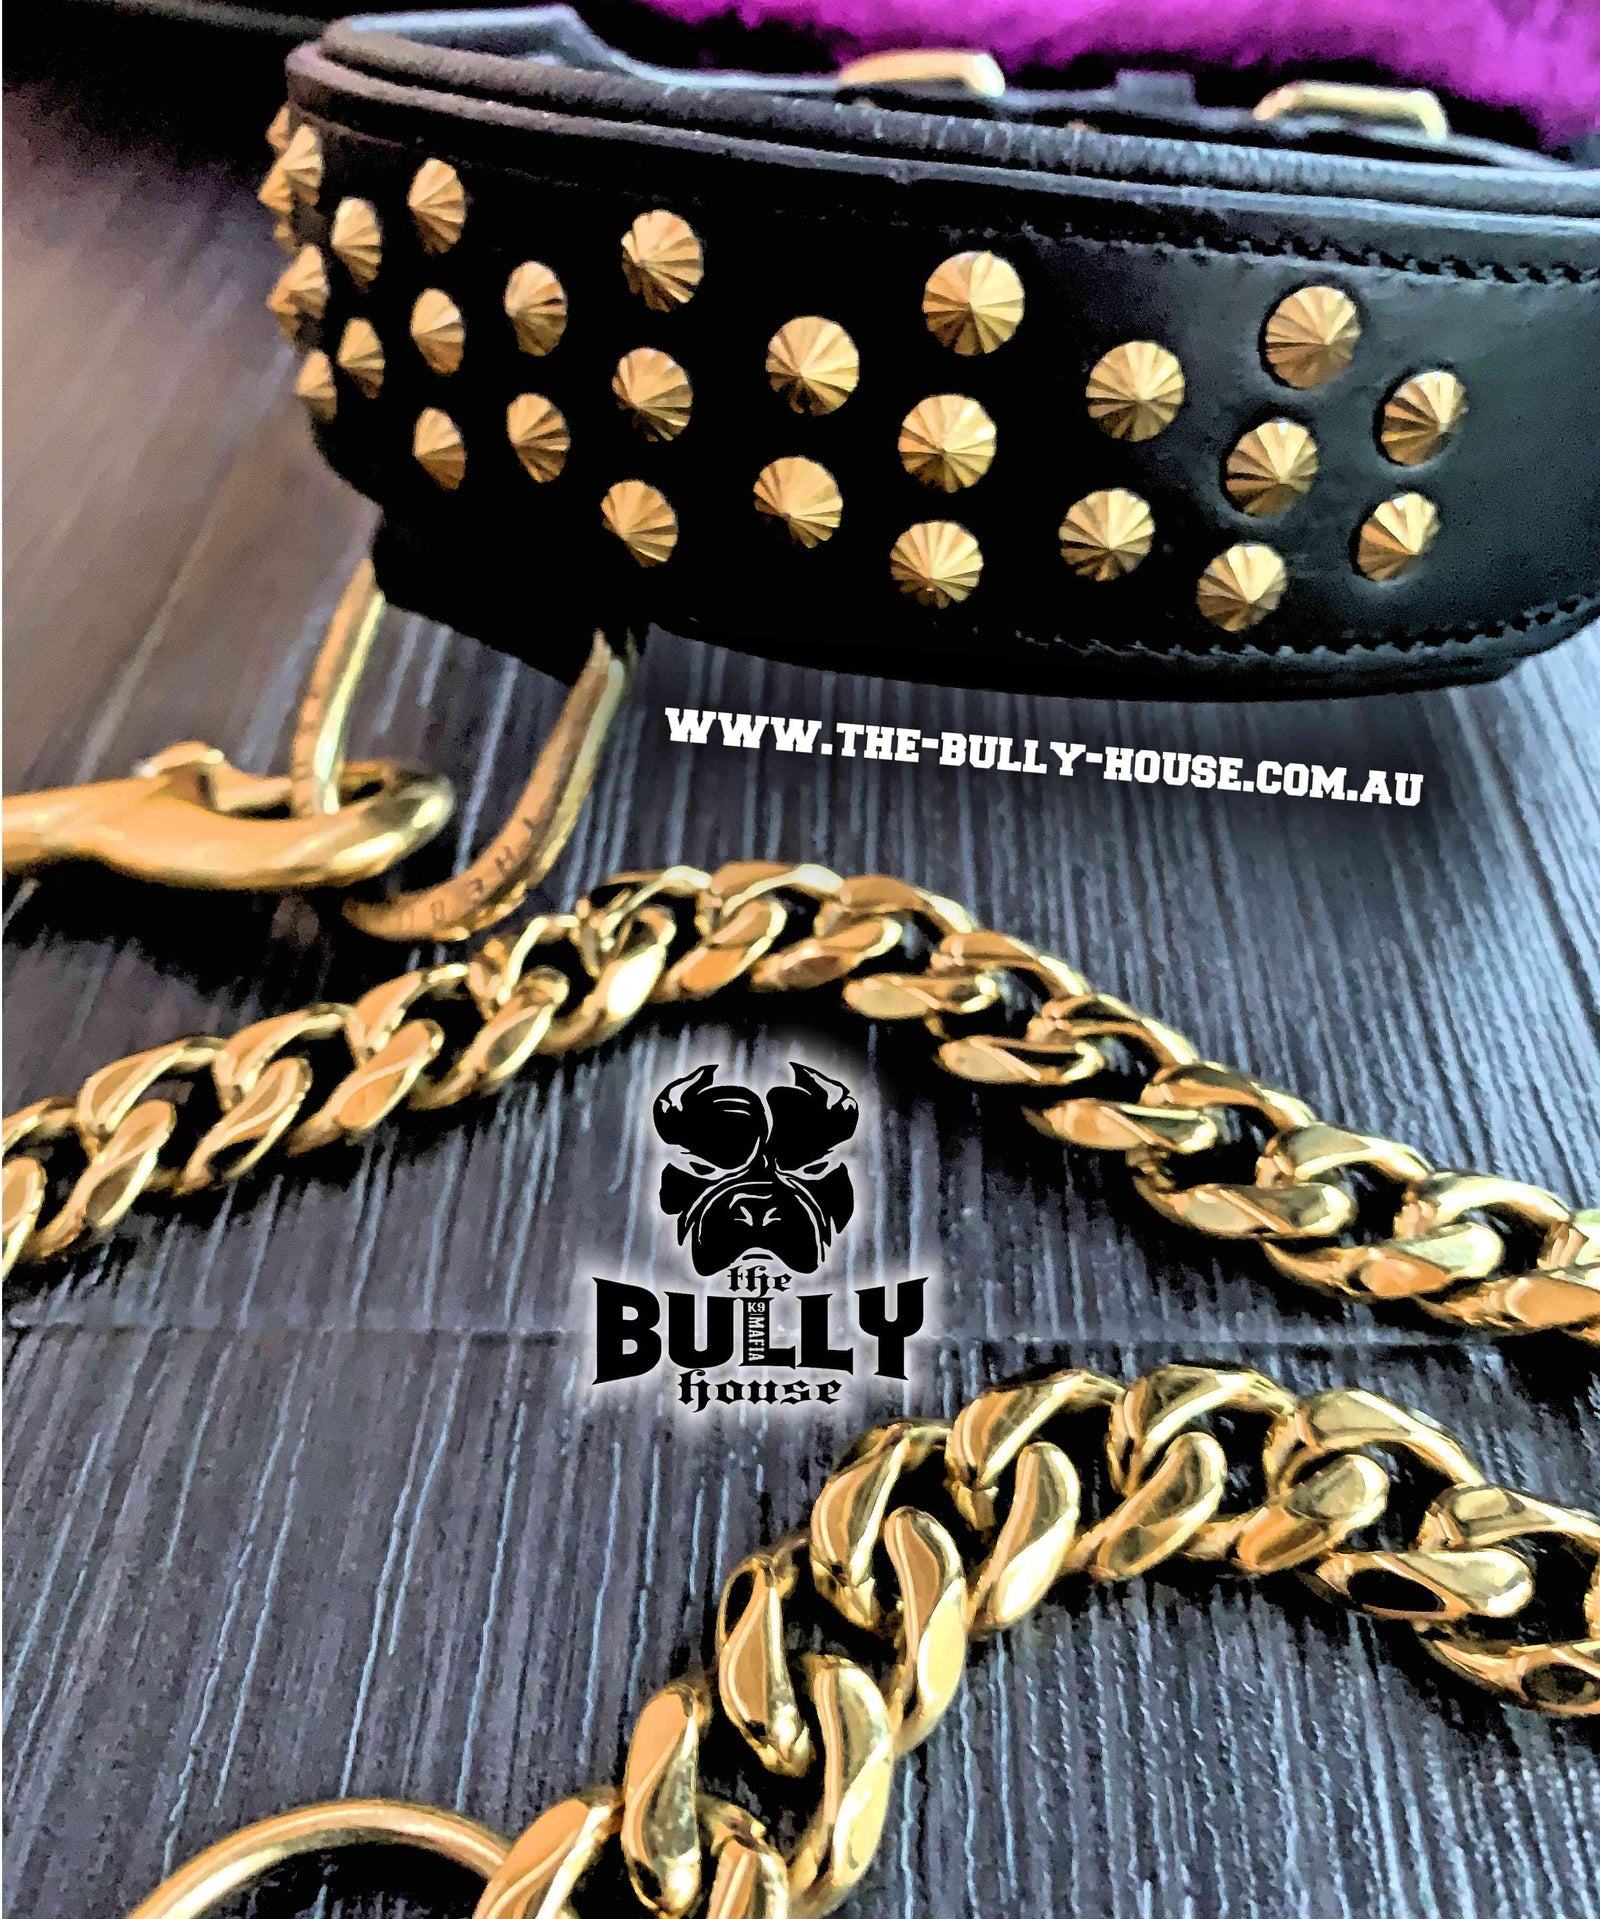 MINI TITAN - Black and Gold - Small Breed and Puppy - FULL Leather